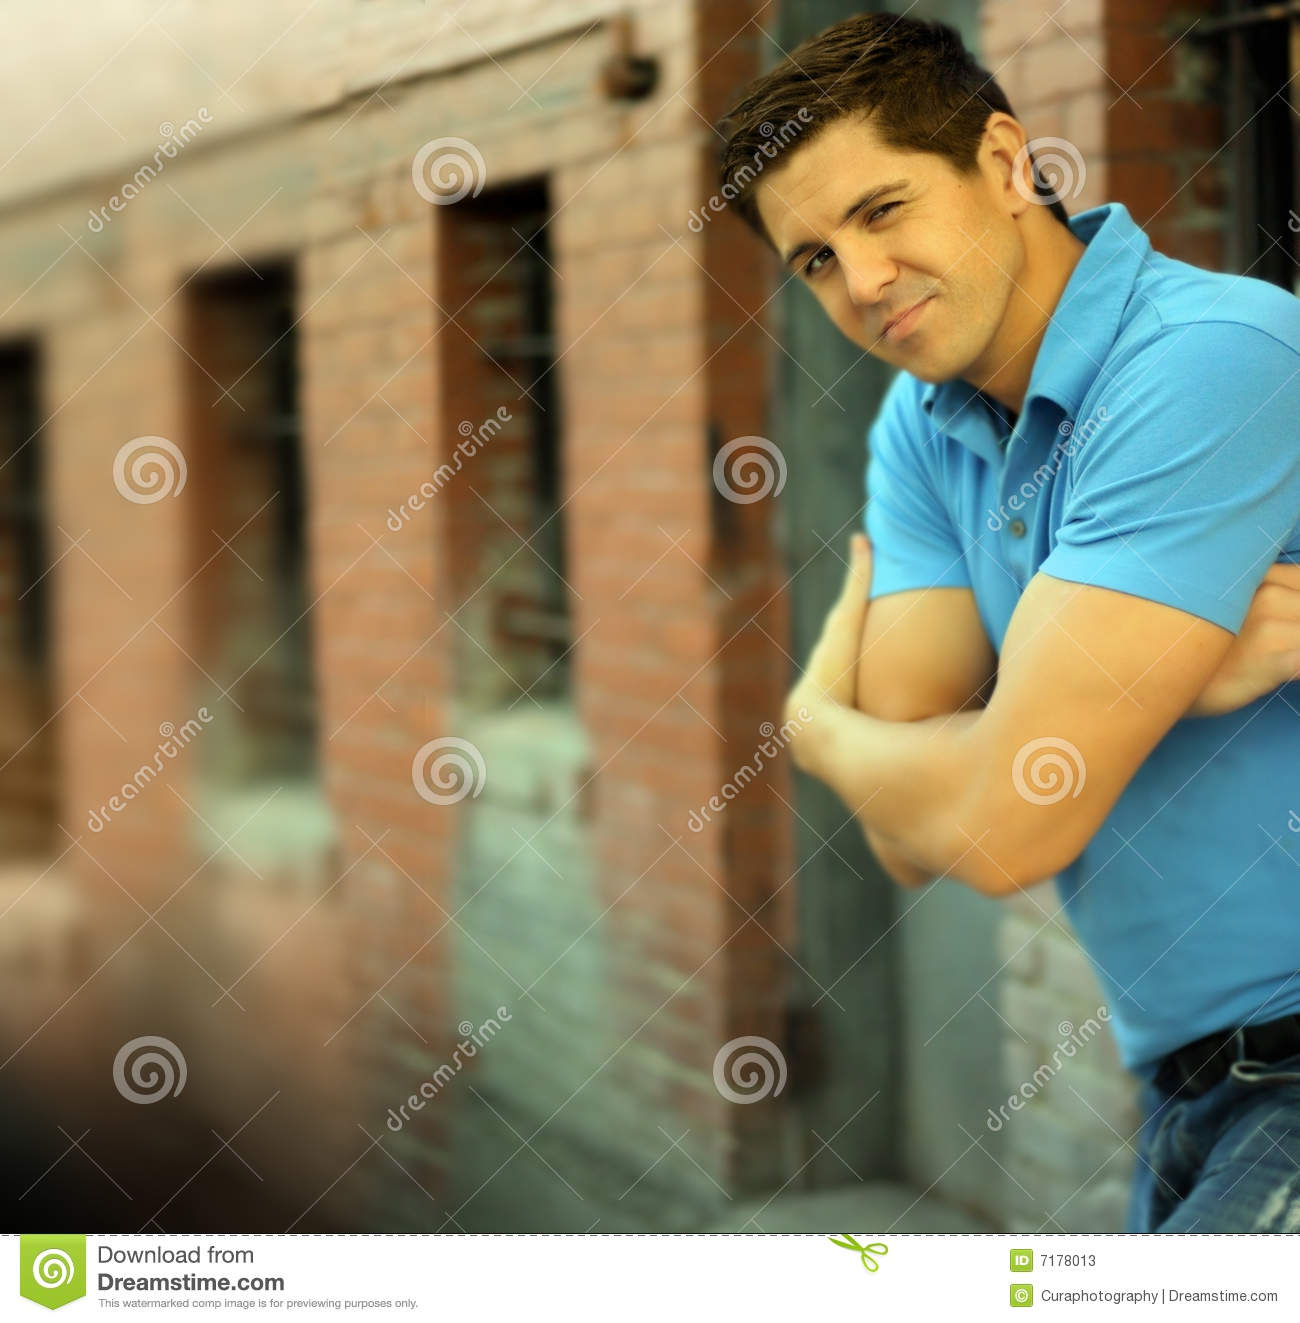 Of Young Good Looking Male Model With Folded Arms While Winking